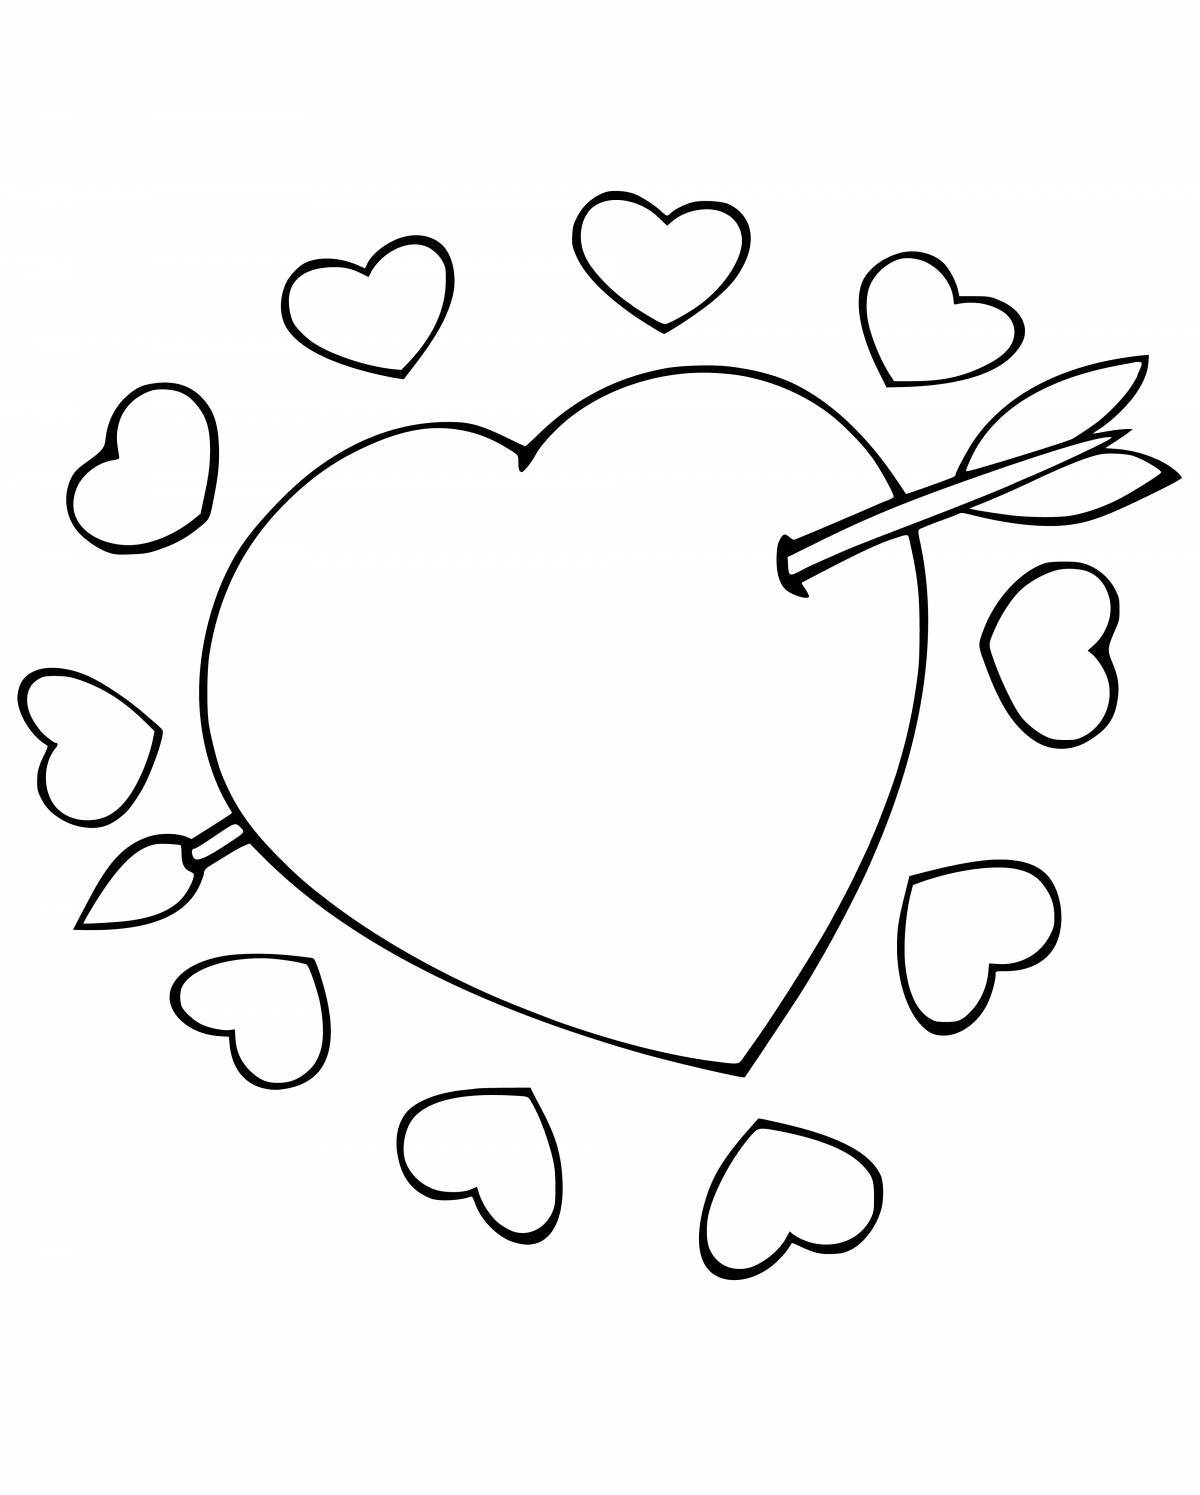 Color-crazy heart coloring page for kids